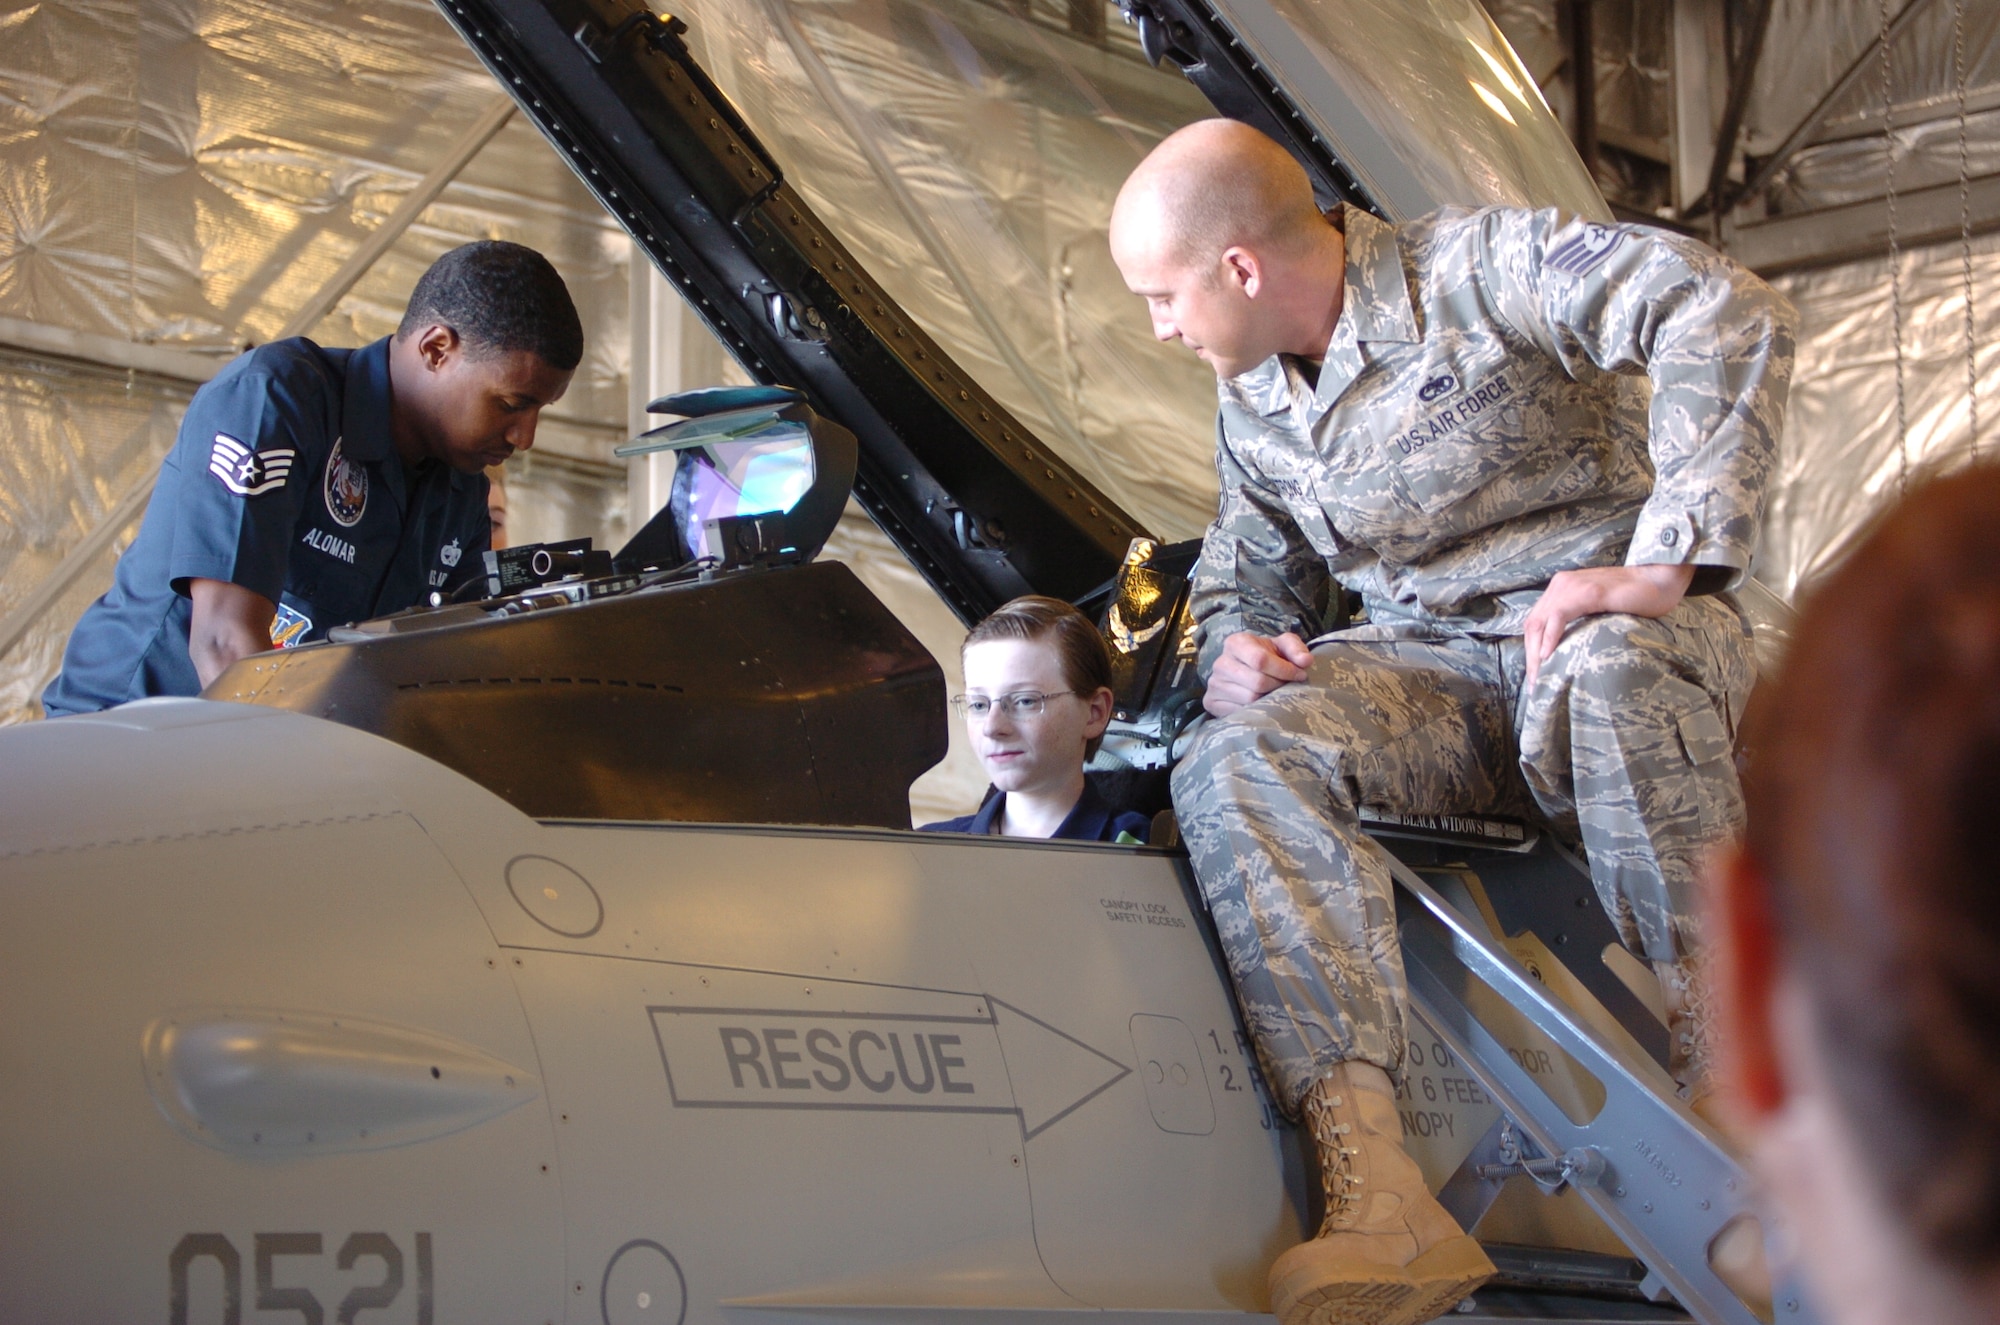 Staff Sgt. Juan Alomar and Staff Sgt. Joshua Armstrong, 388th Aircraft Maintenance Squadron Viper West Demo Team, explain to Tyler Peterson, a student at Snow Horse Elementary School, about some of the controls in the cockpit of the F-16. The students and their families got to sit inside the F-16 and experience what it was like to be a pilot. (U.S. Air Force photo by Airman 1st Class Melissa Dearstone)